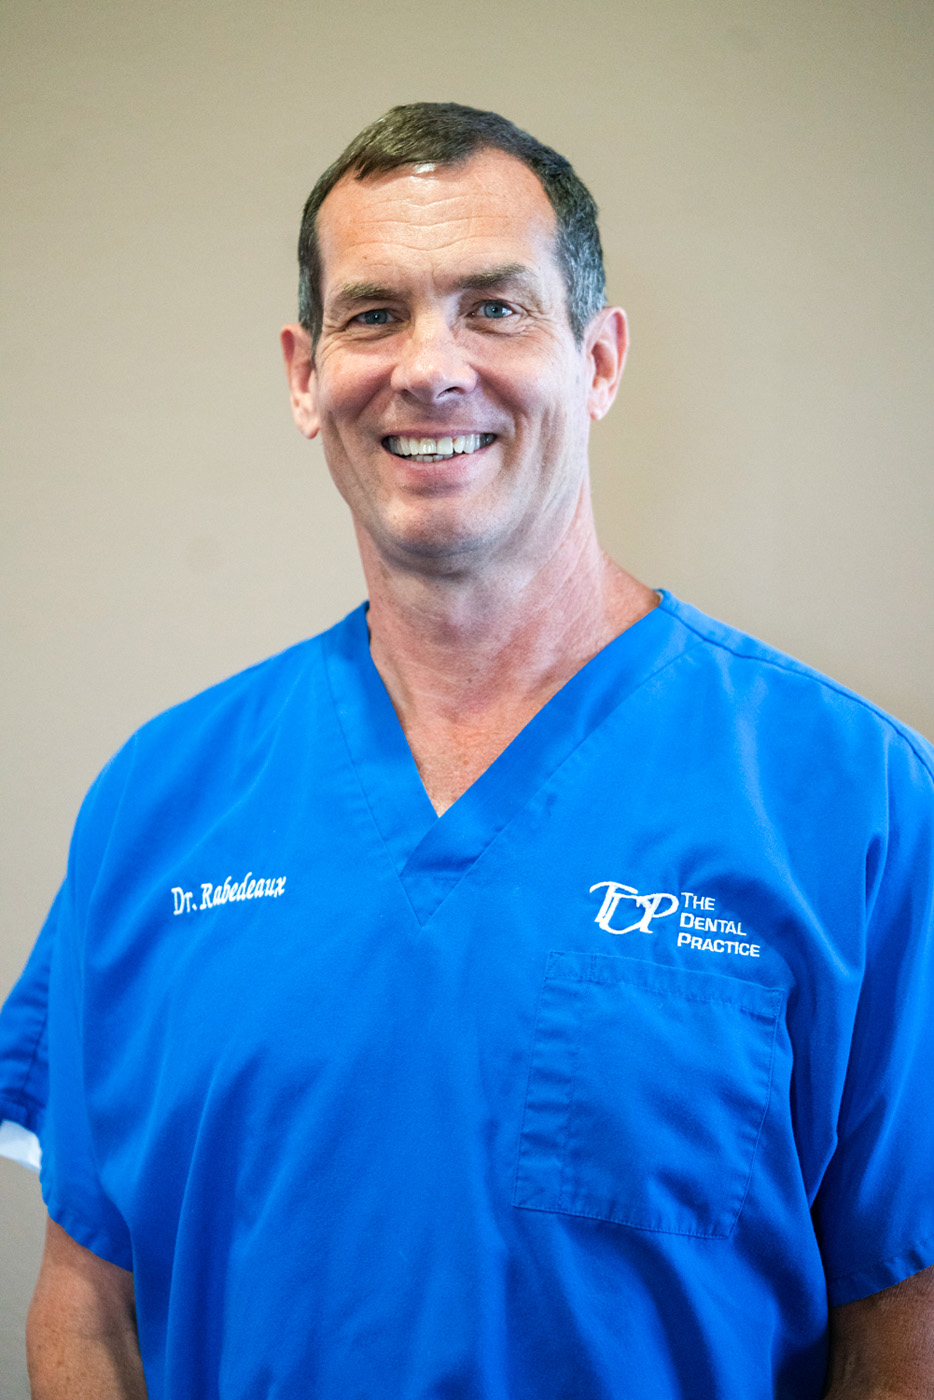 Dr. Steven Rabedeaux, DDS, MAGD - Dentist in Newton, IA at The Dental Practice